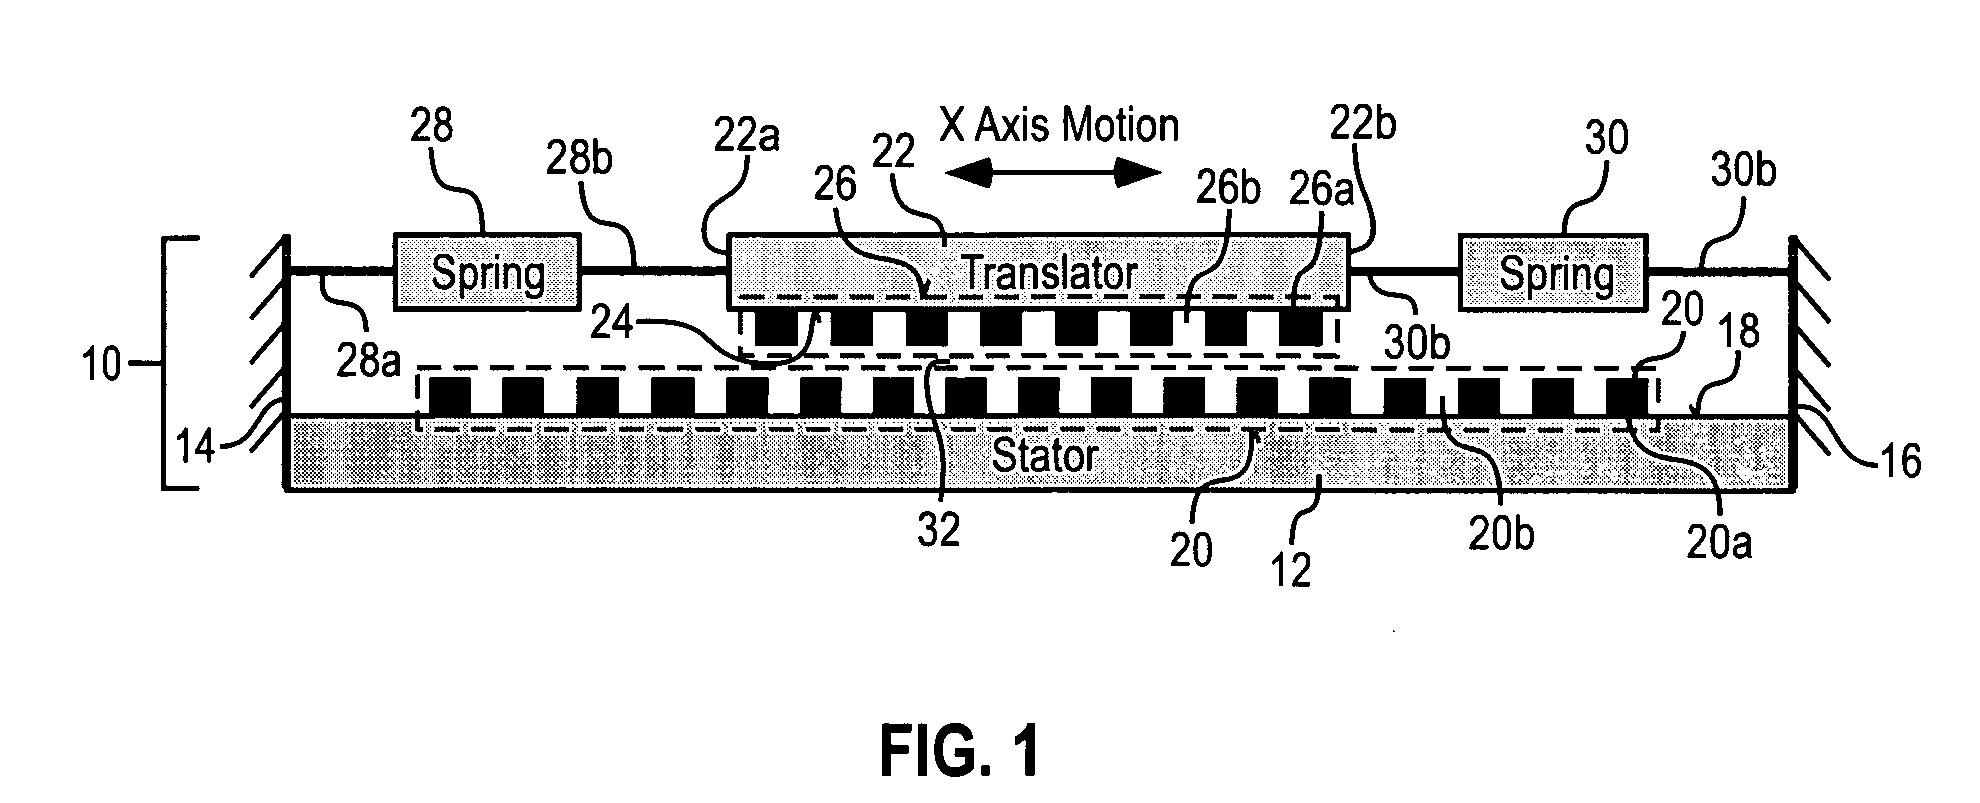 System for controlling an electrostatic stepper motor